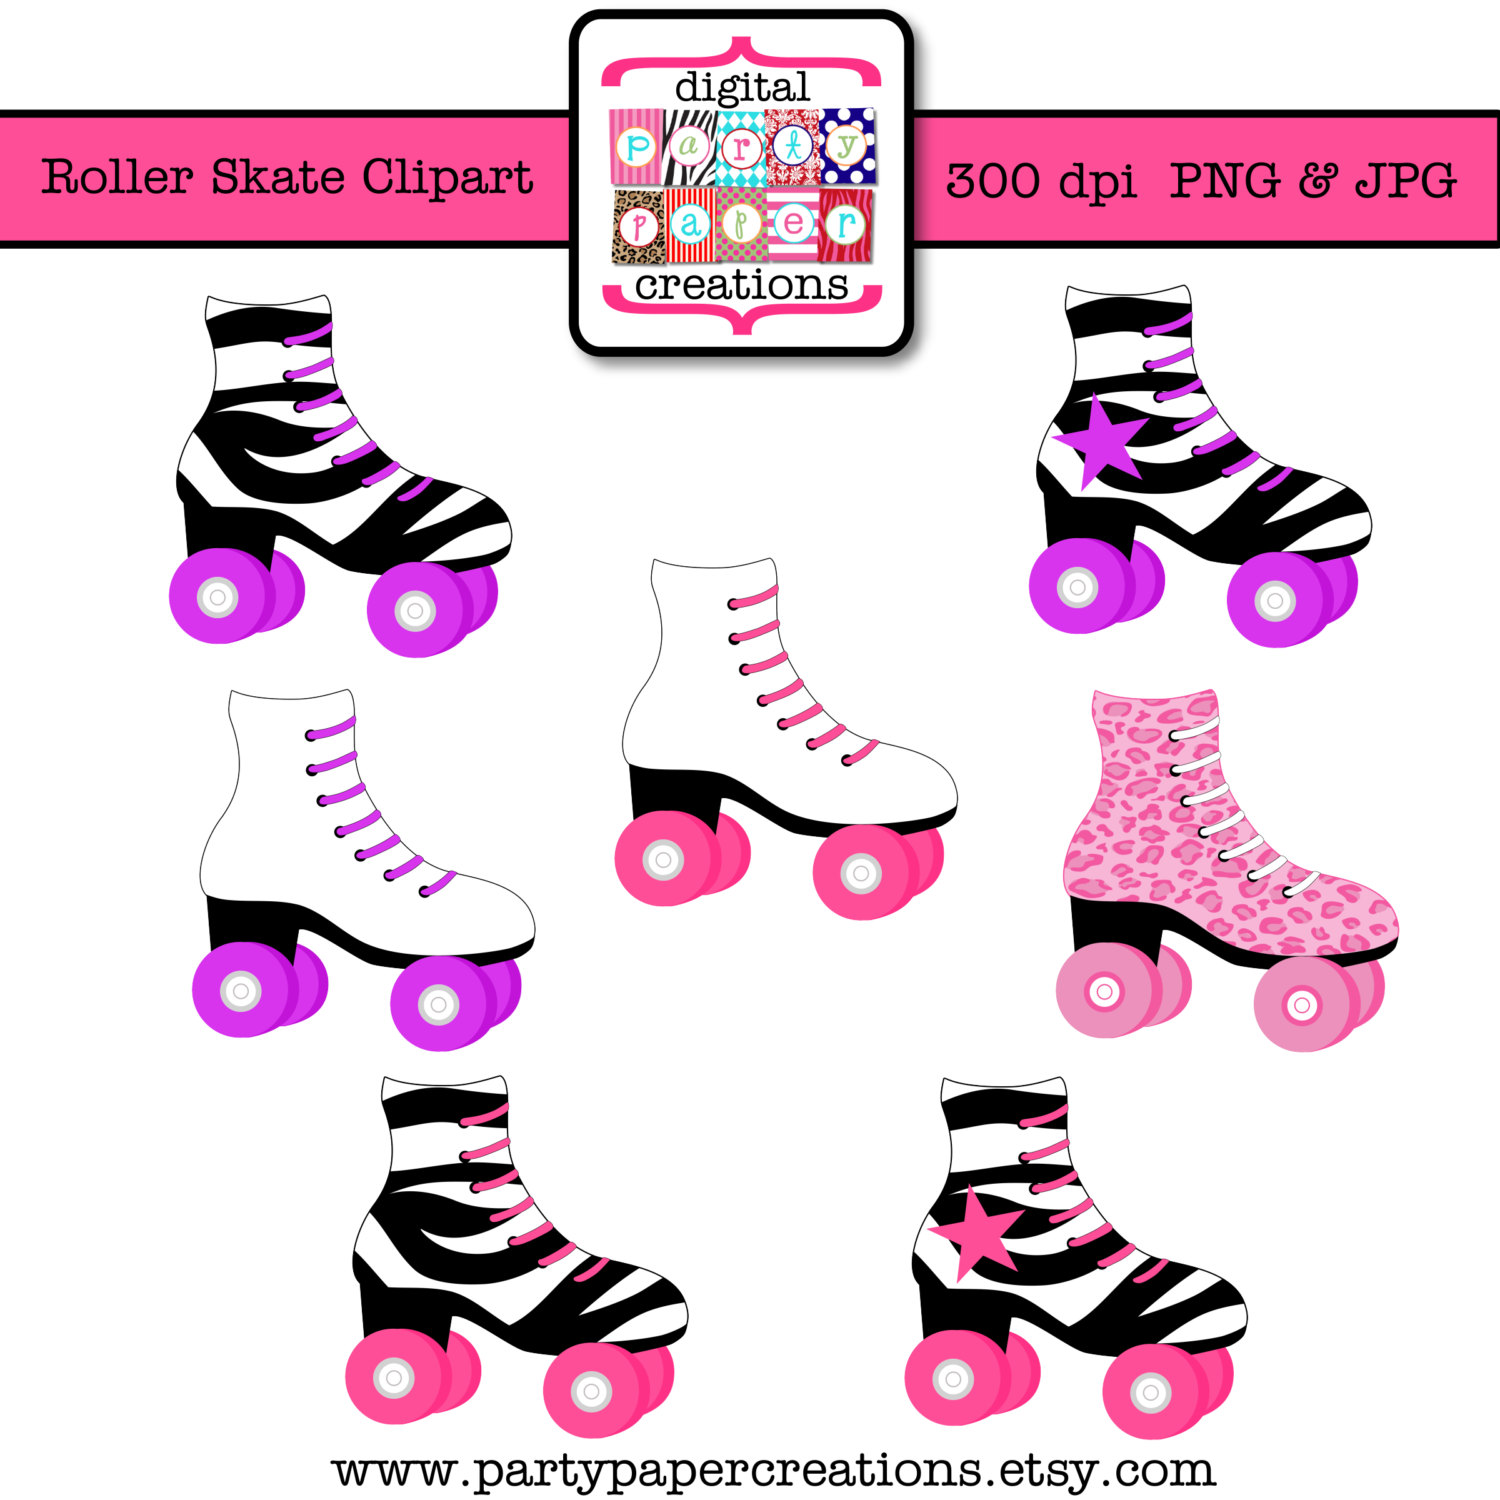 Roller Skate Clipart Skating Party Clipart By Partypapercreations